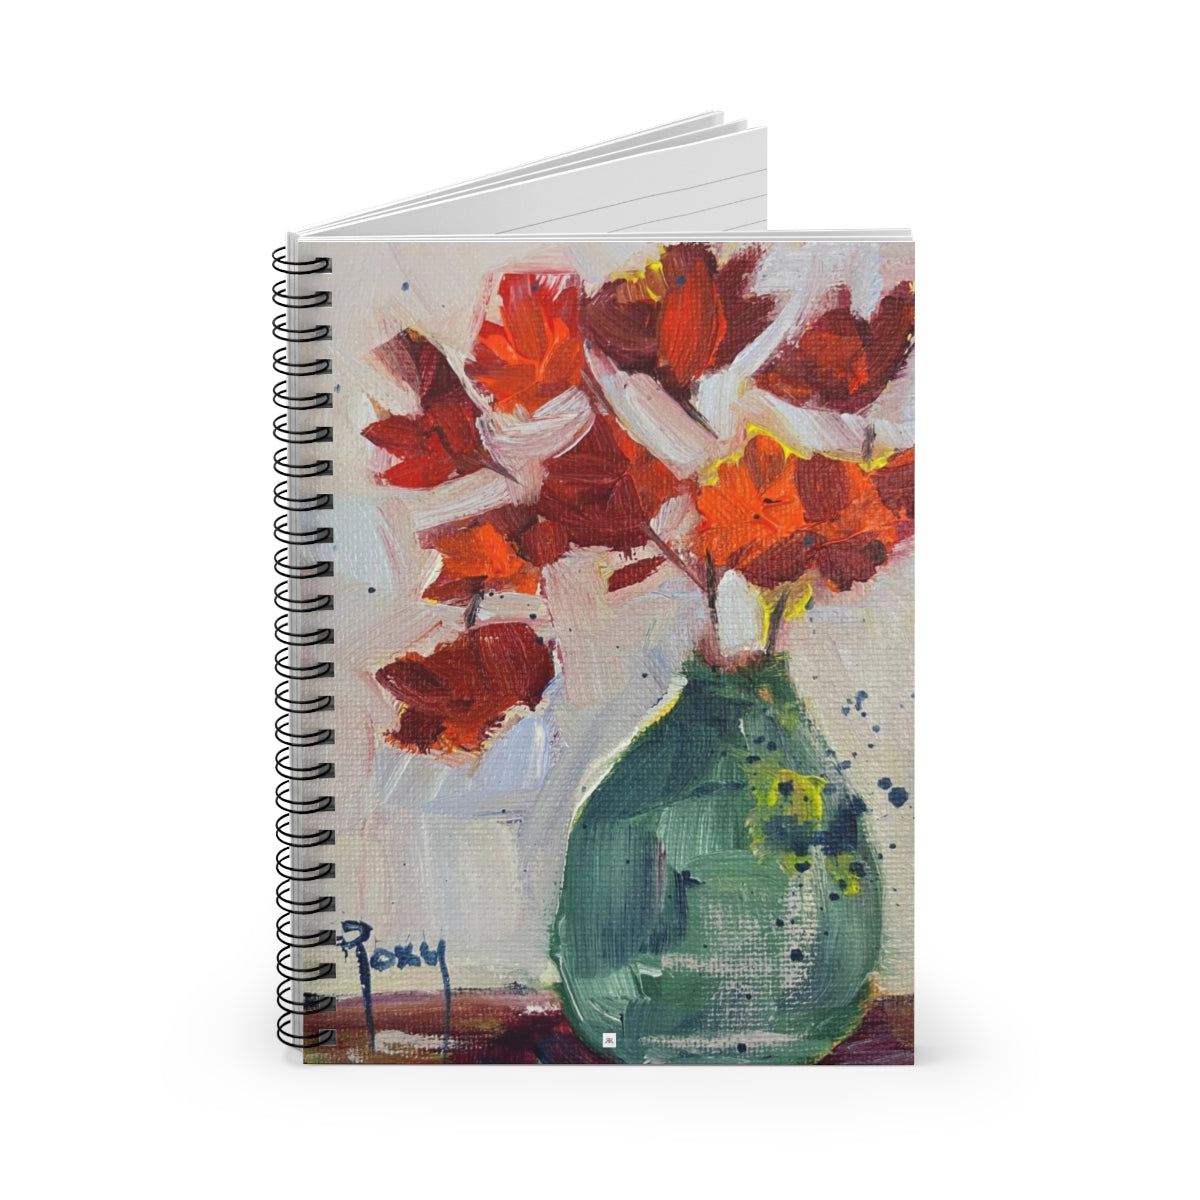 Maple Leaves in a Teal Vase Spiral Notebook